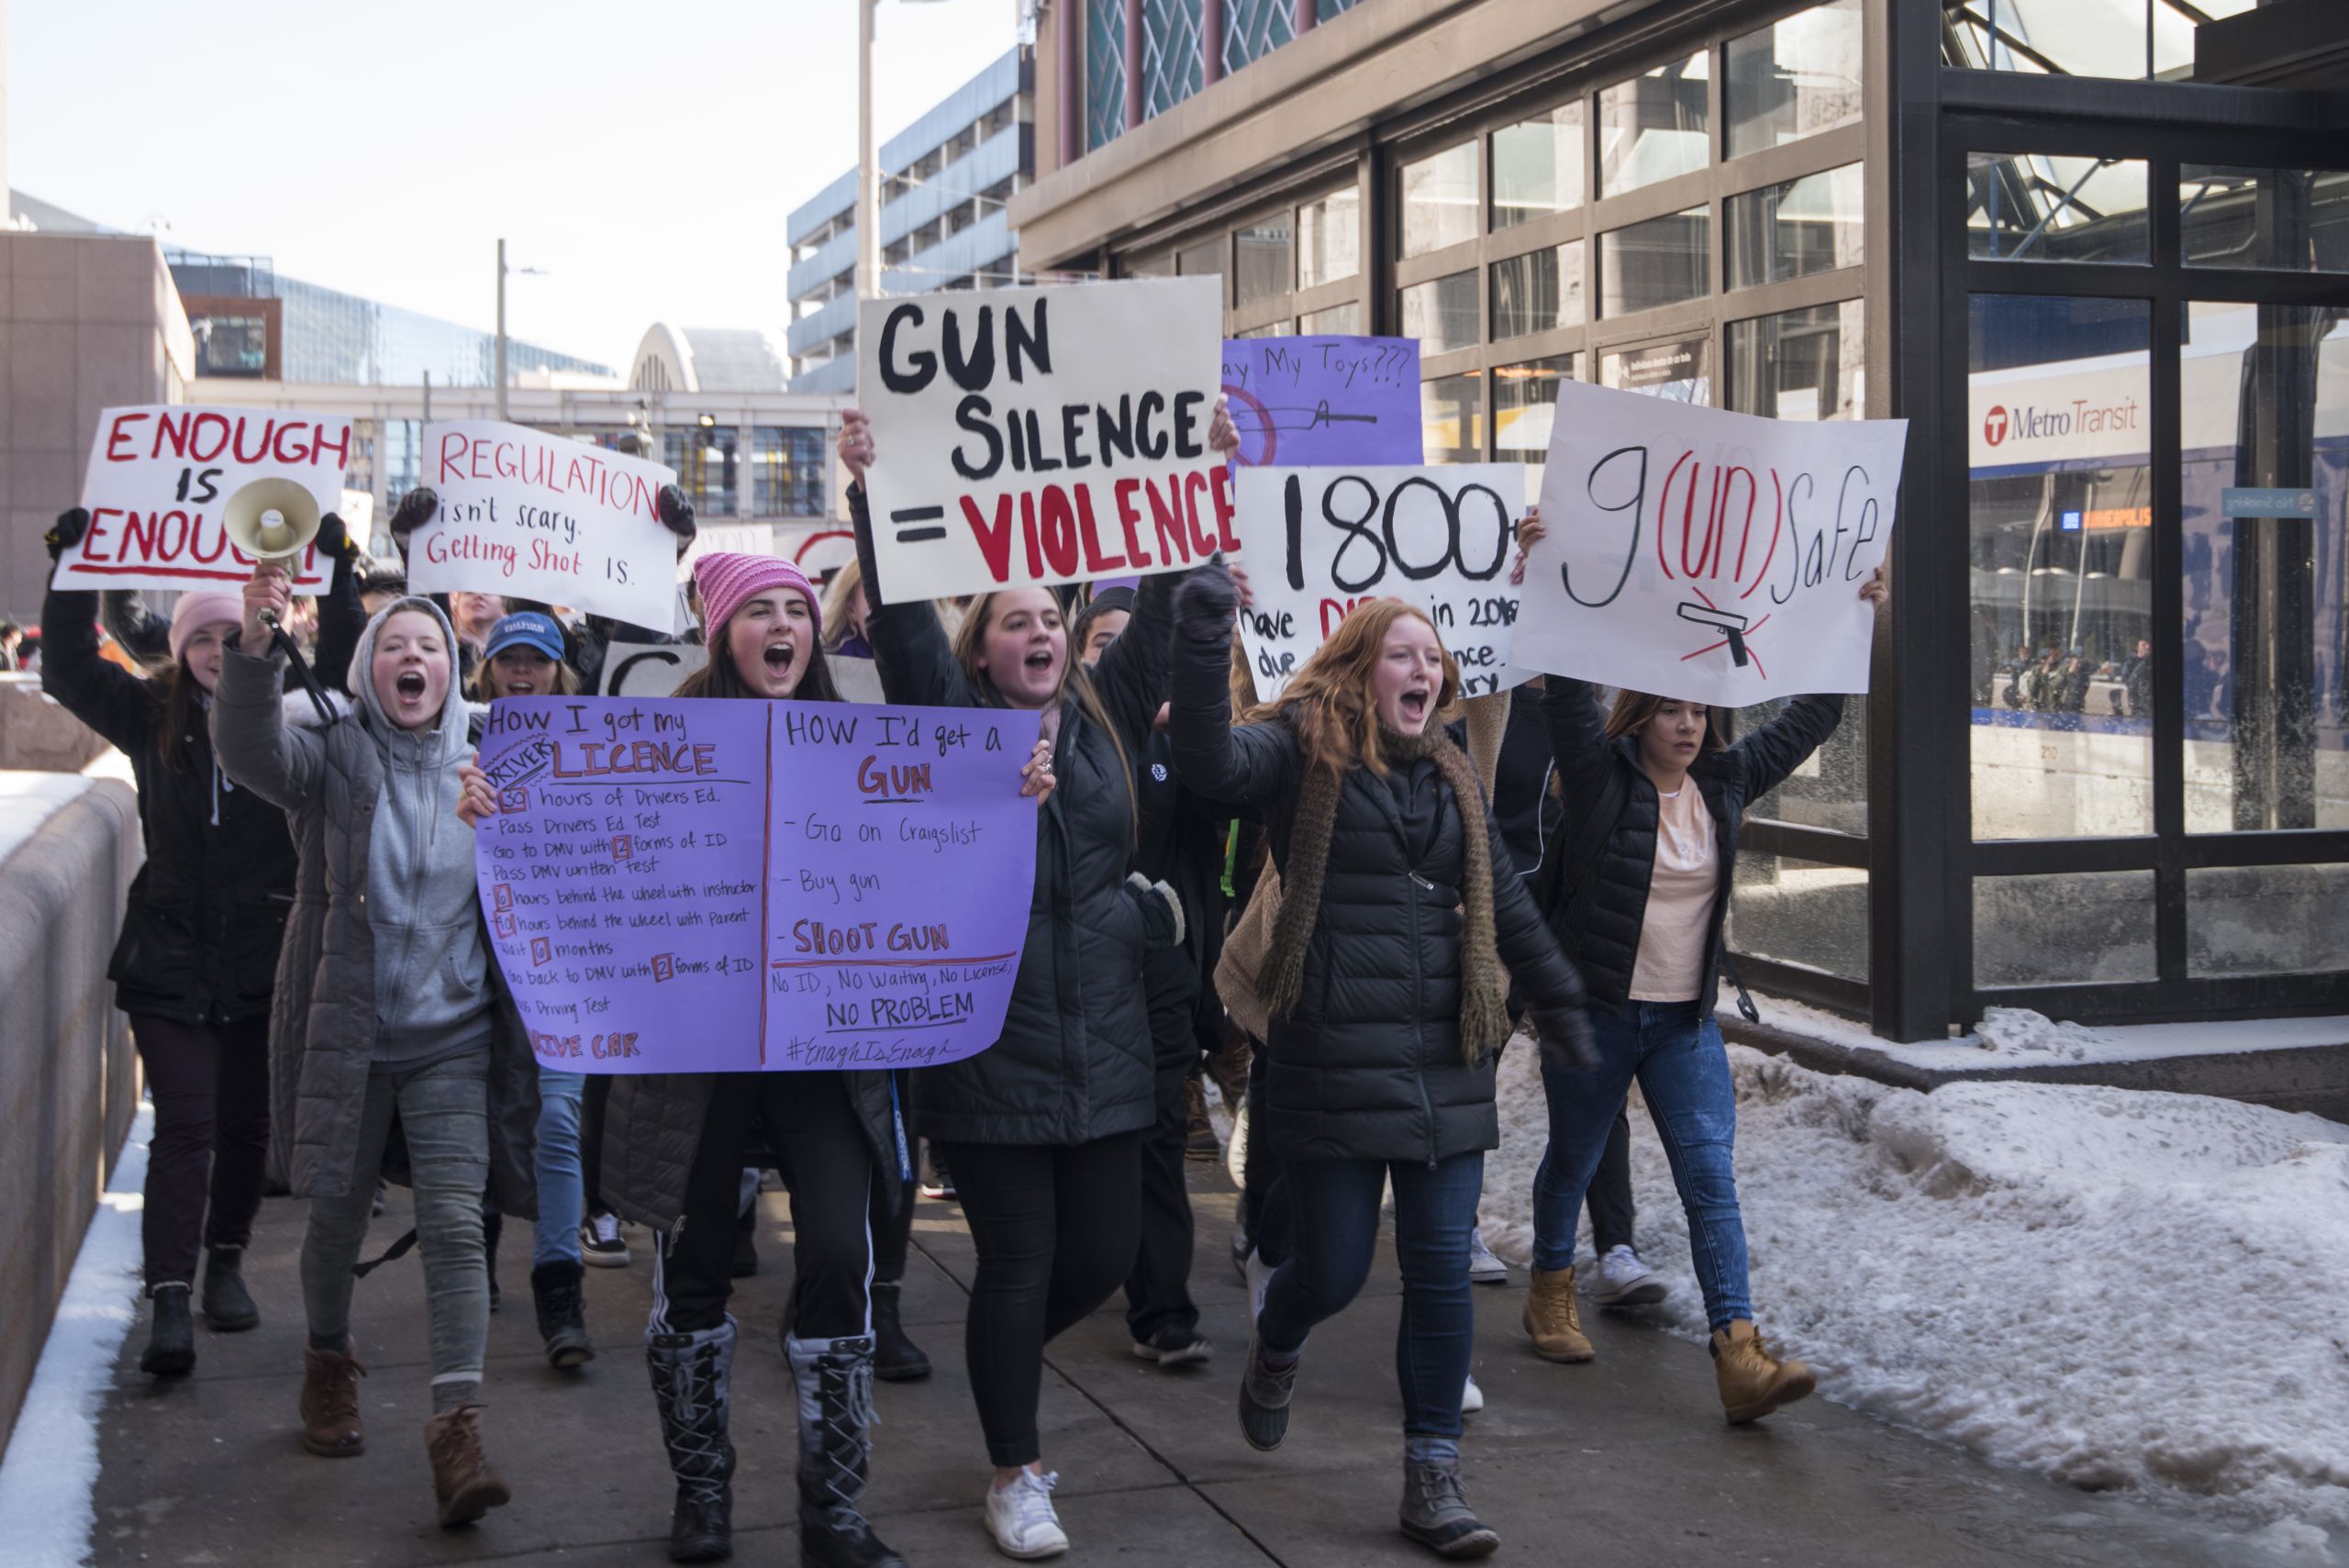 A group of high schoolers protesting for gun reform. Photo by Fibonacci Blue via Creative Commons/Wiki media.